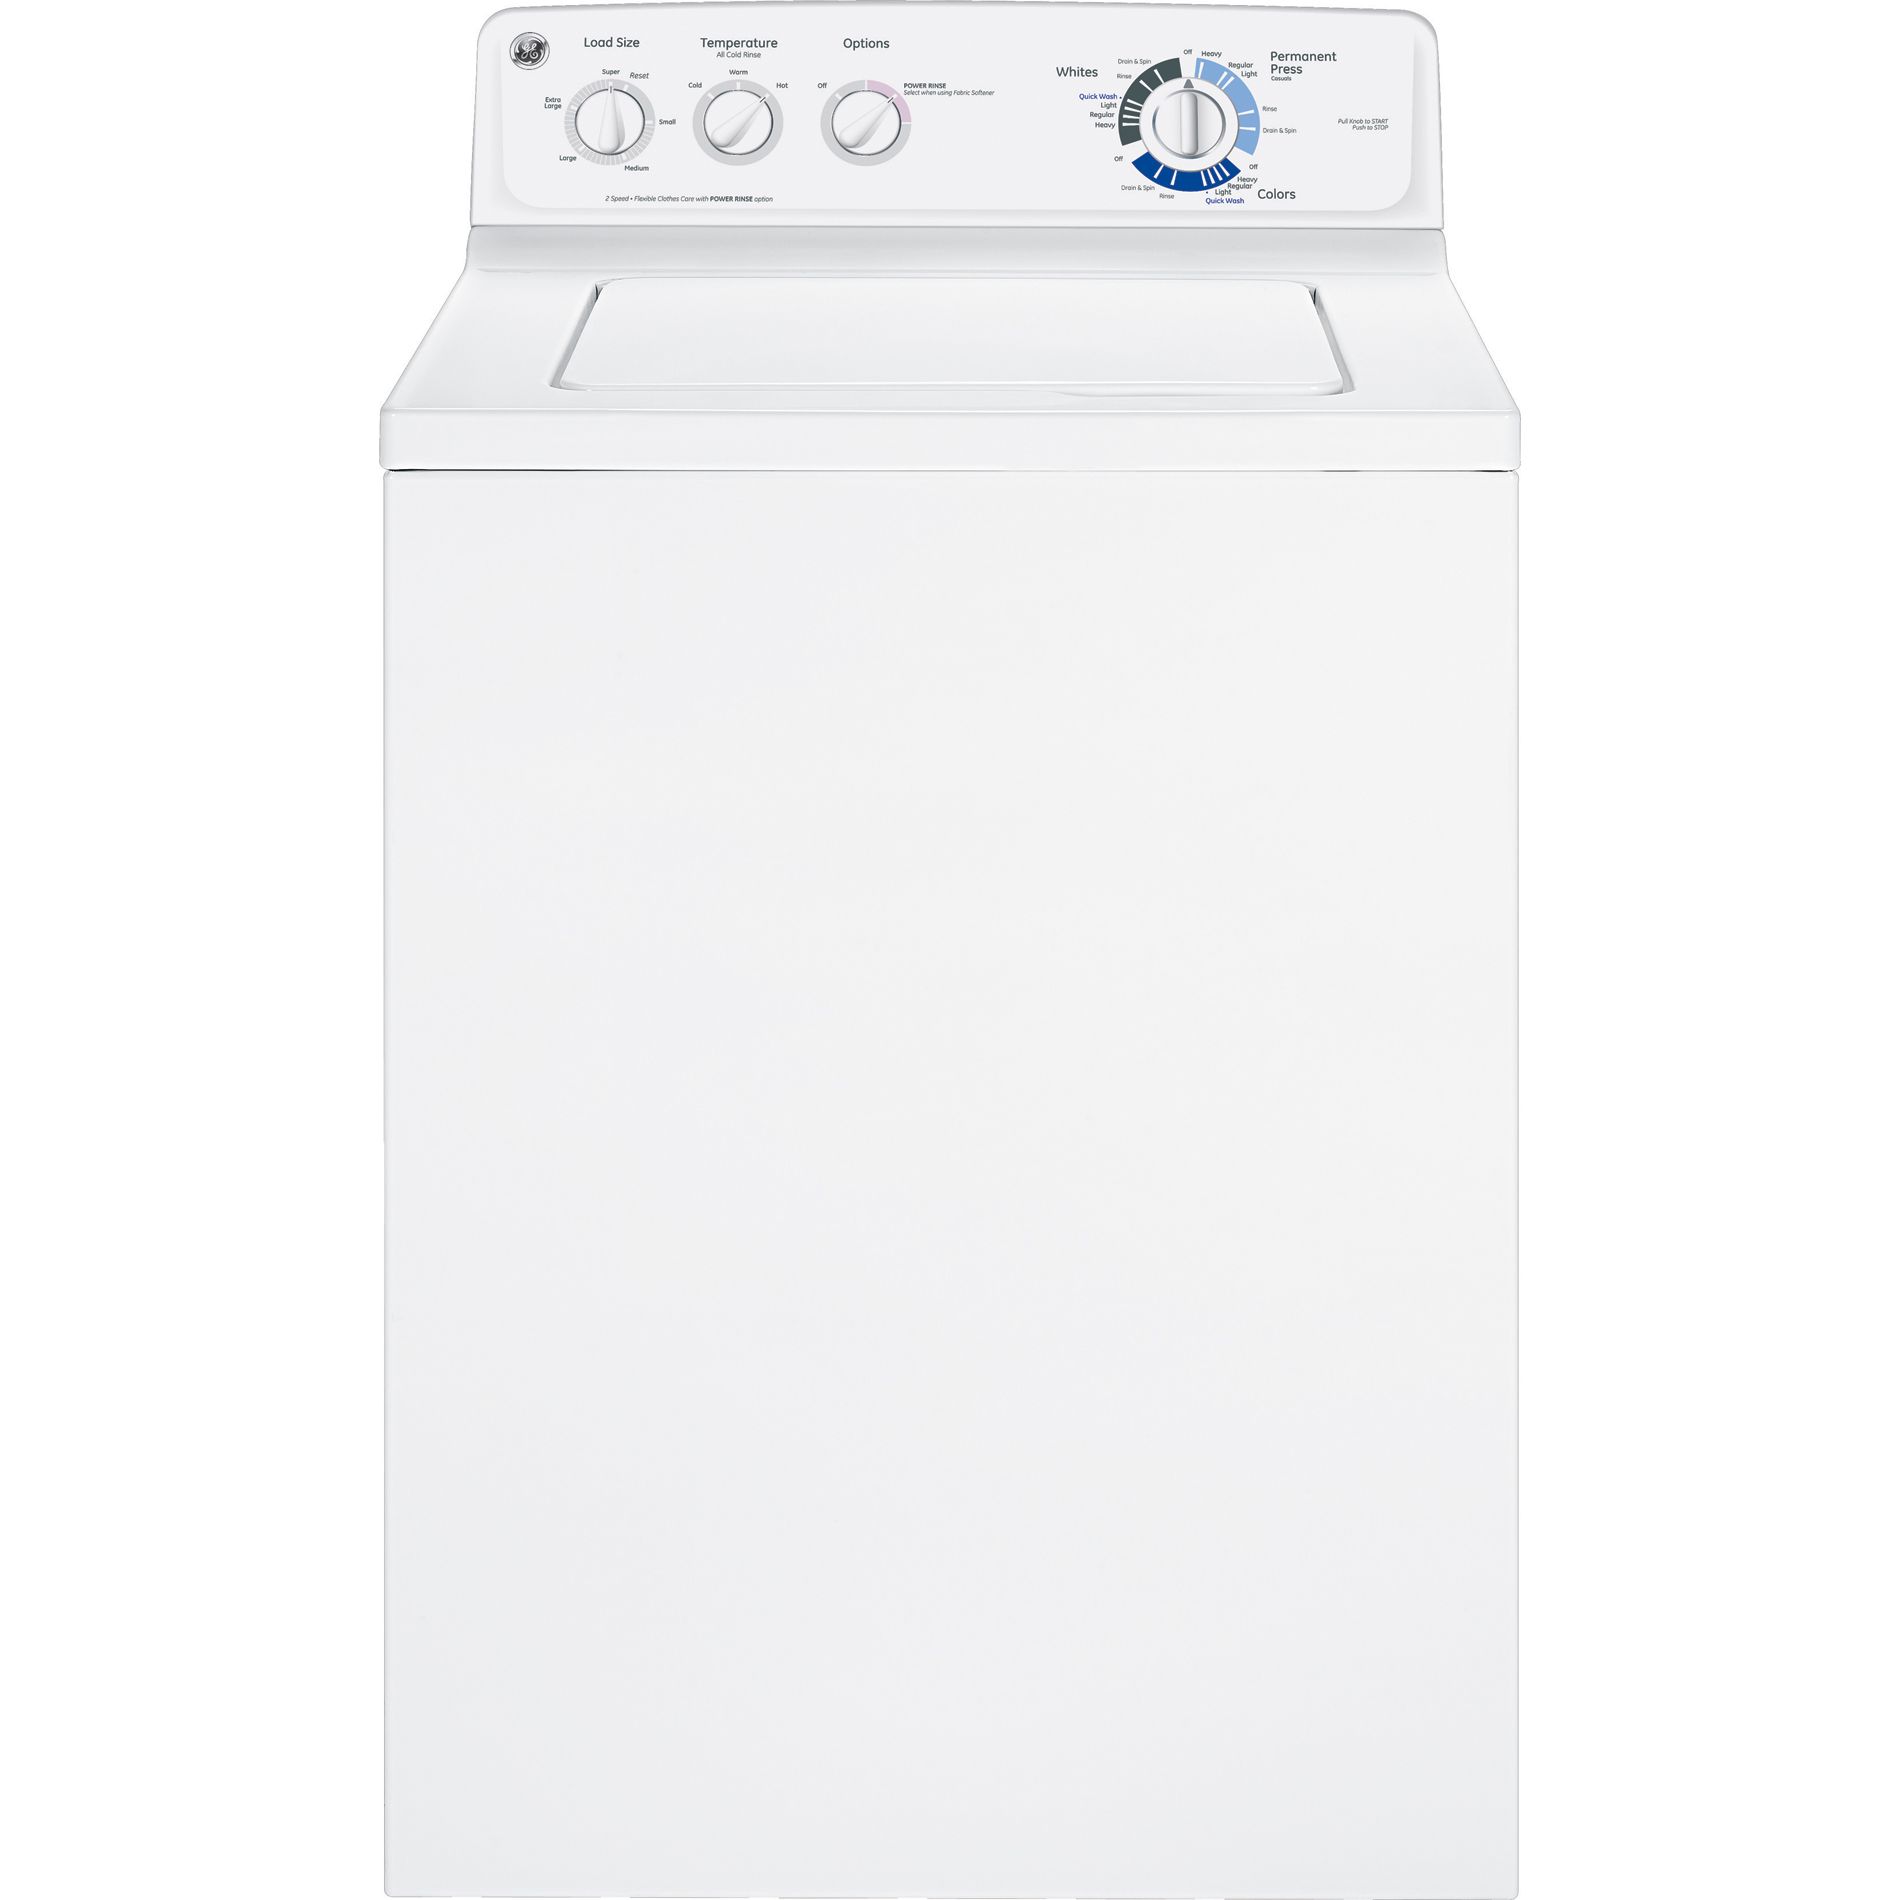 GE 3.9 cu. ft. Top Load Washer - White